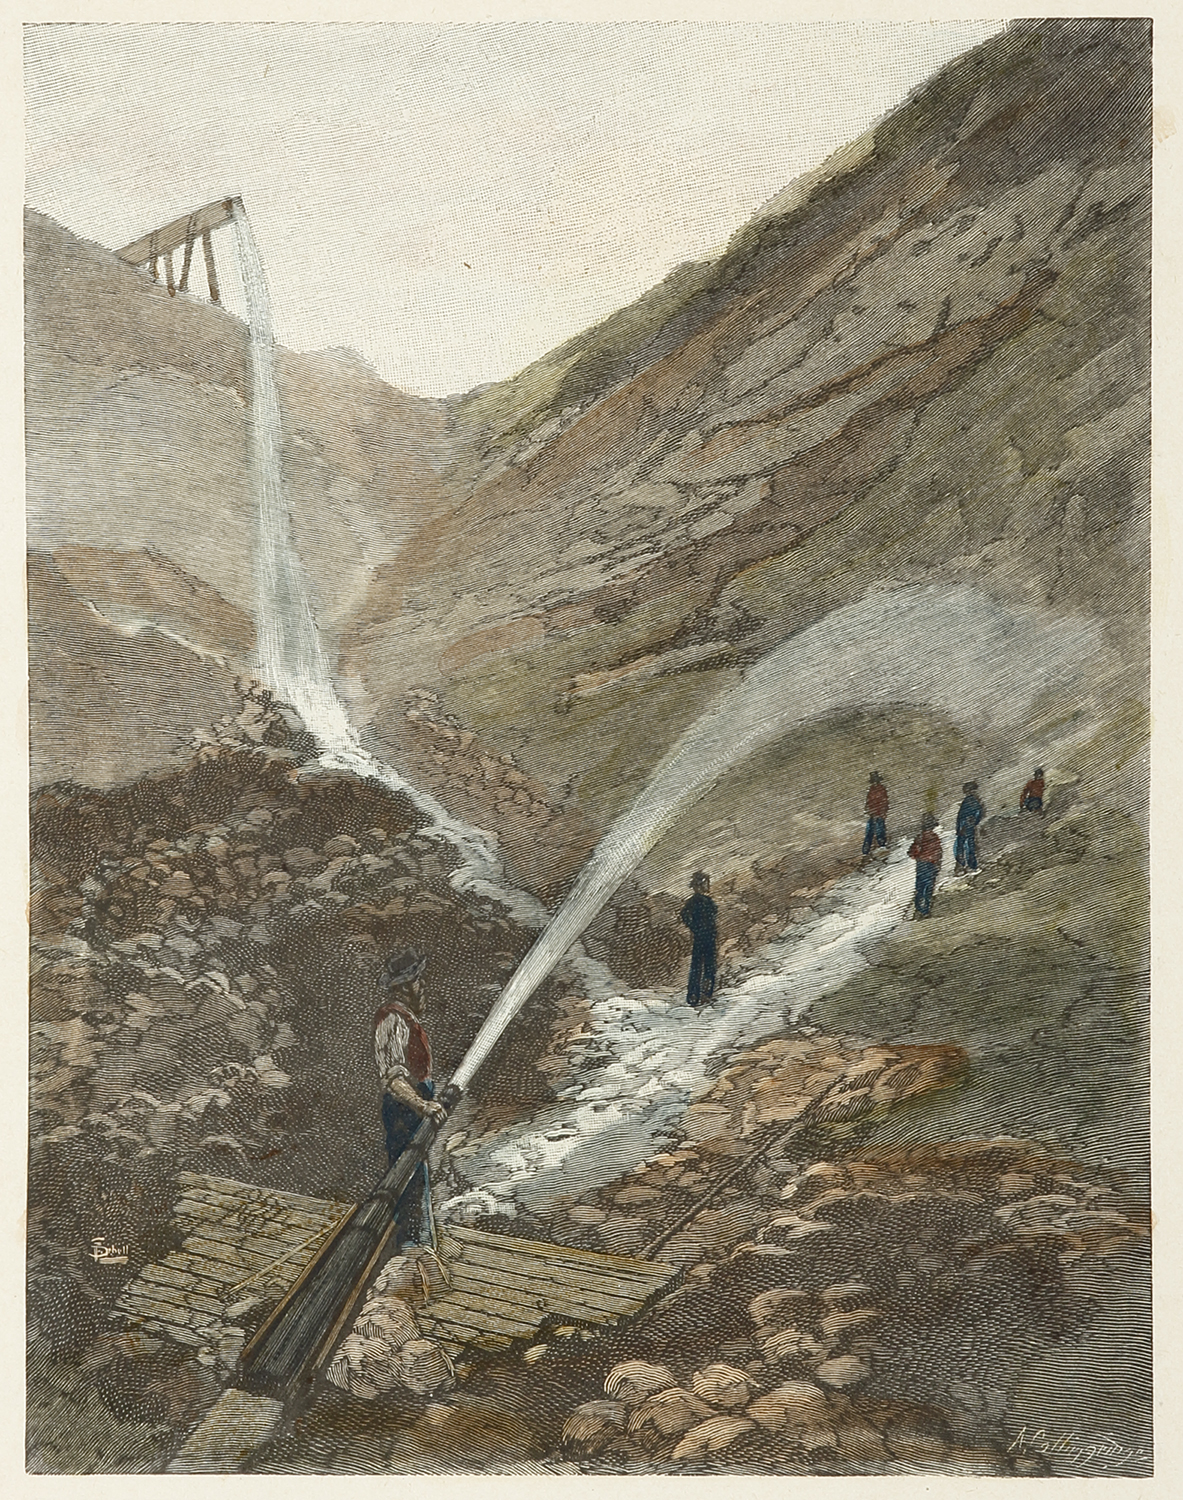 Hydraulic Mining in New South Wales. - Antique View from 1886